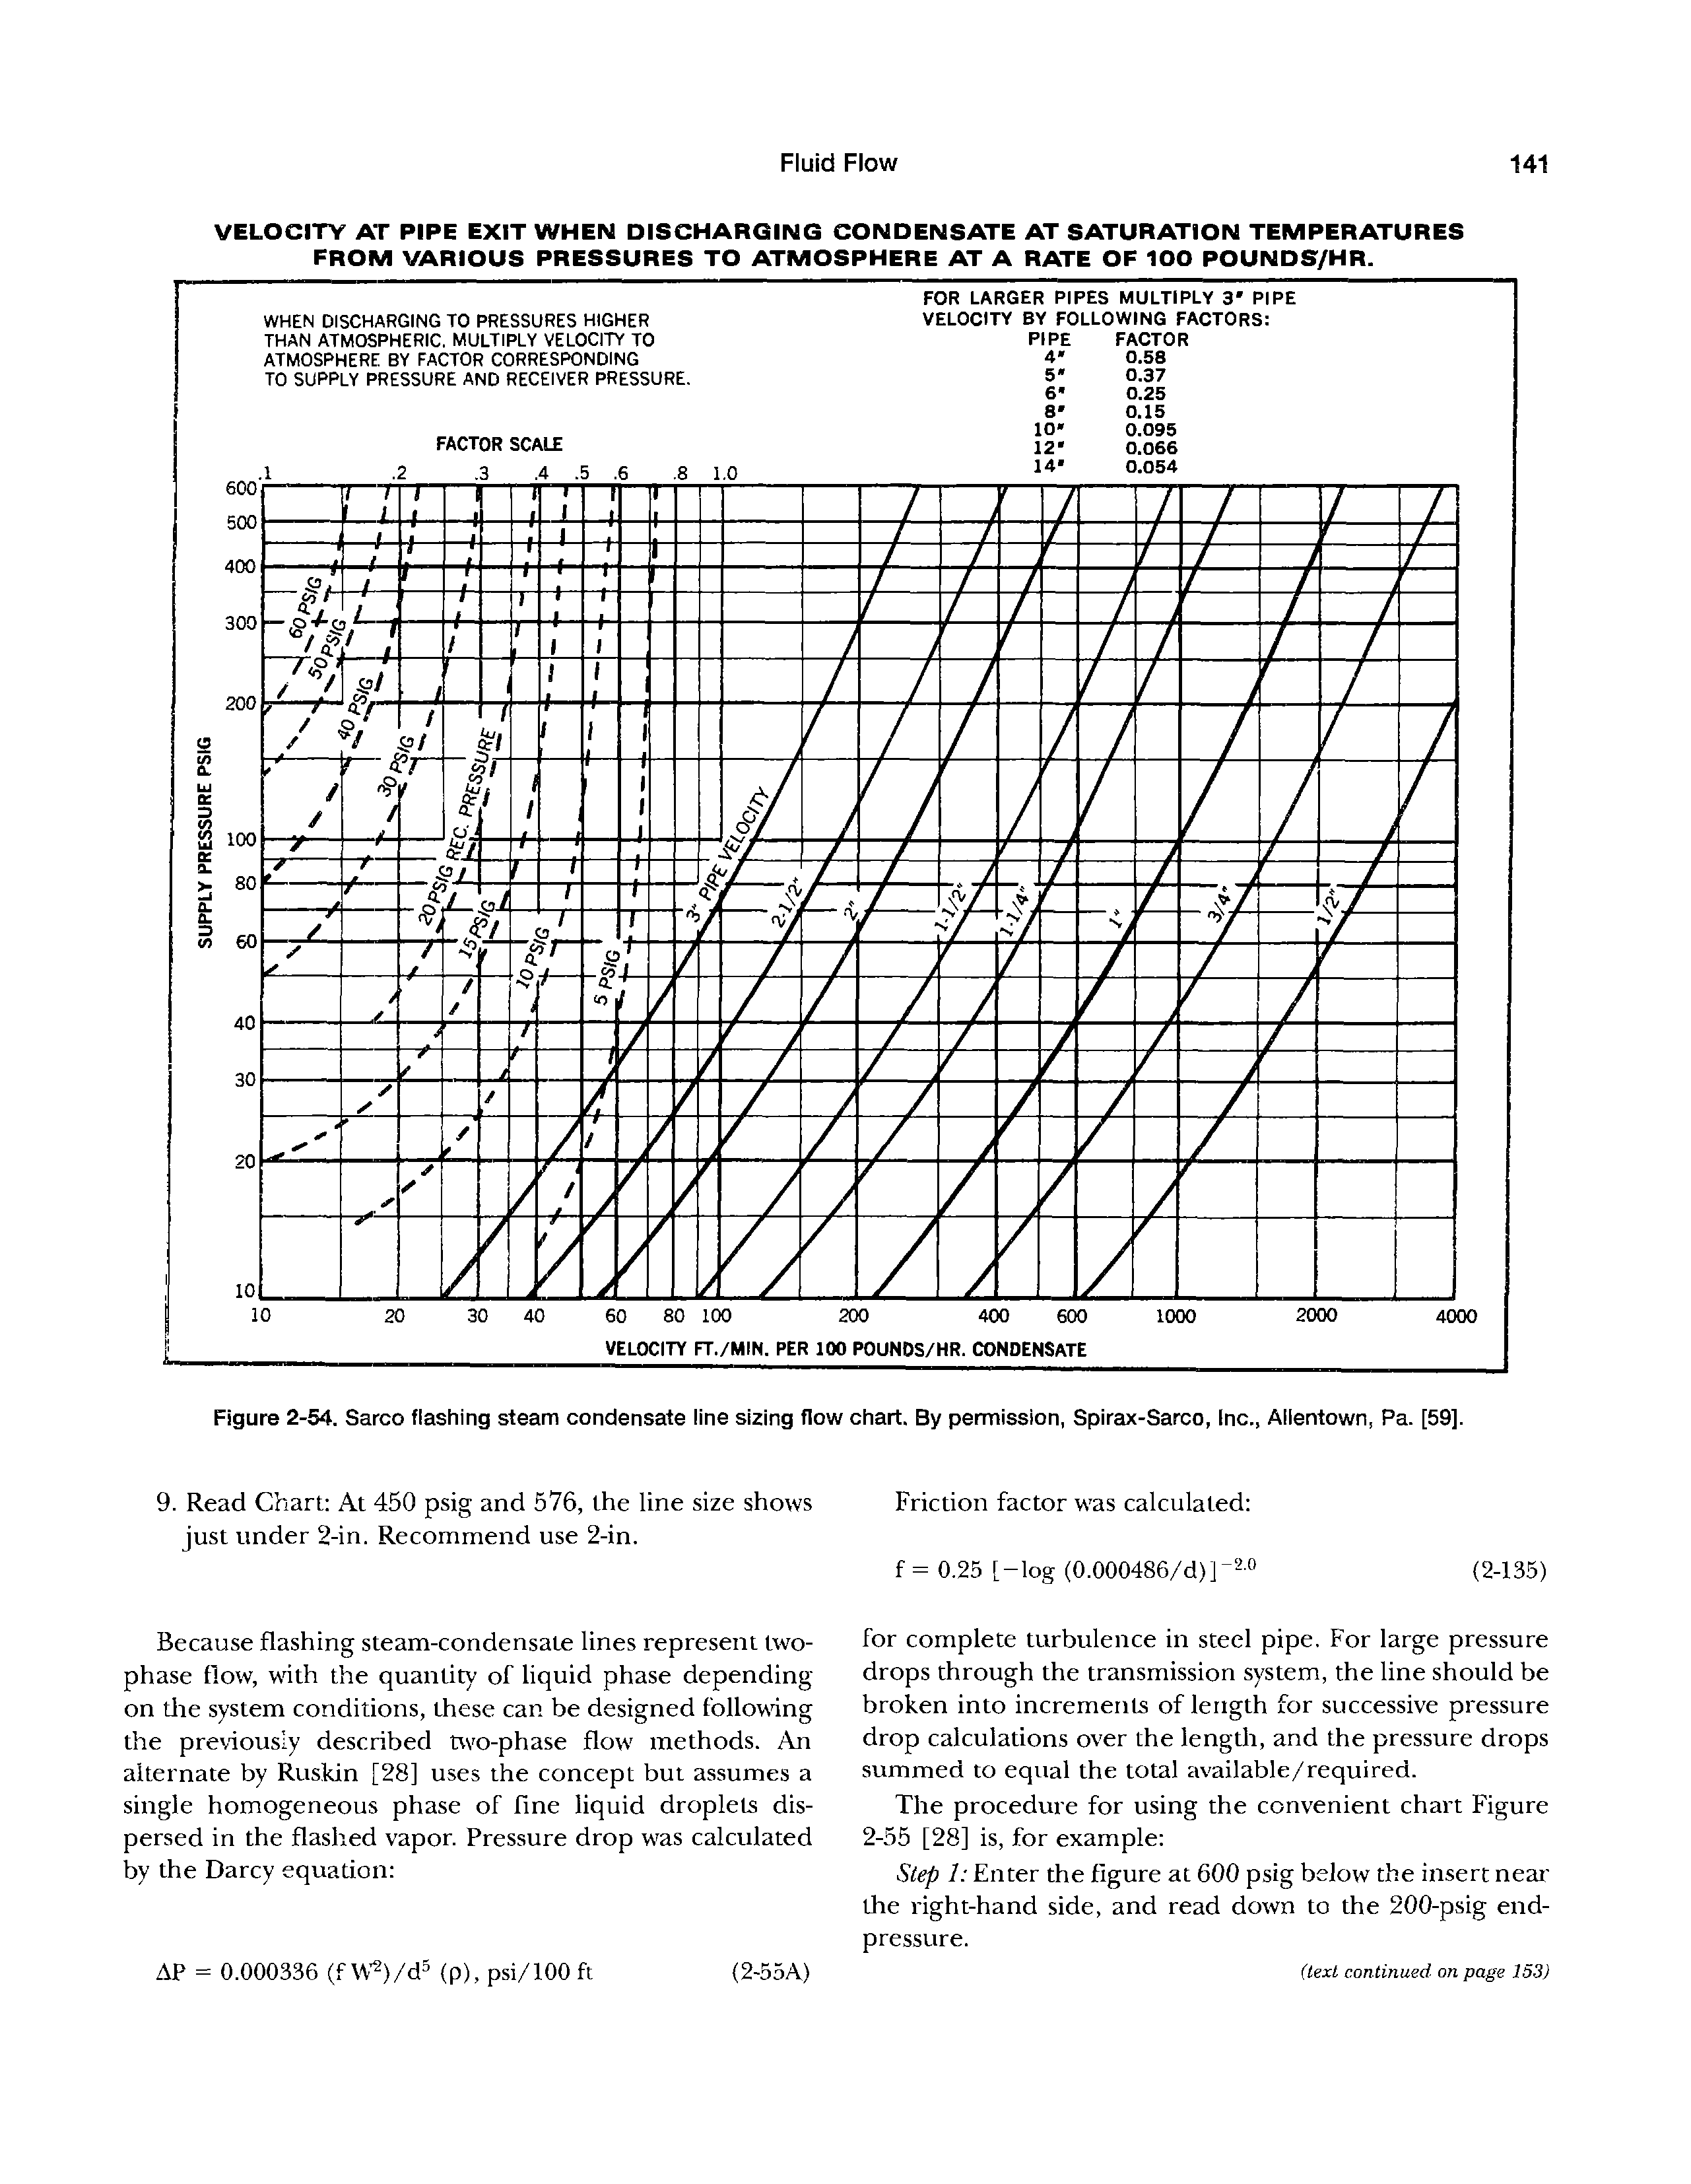 Figure 2-54. Sarco flashing steam condensate line sizing flow chart. By permission, Spirax-Sarco, Inc., Allentown, Pa. [59].